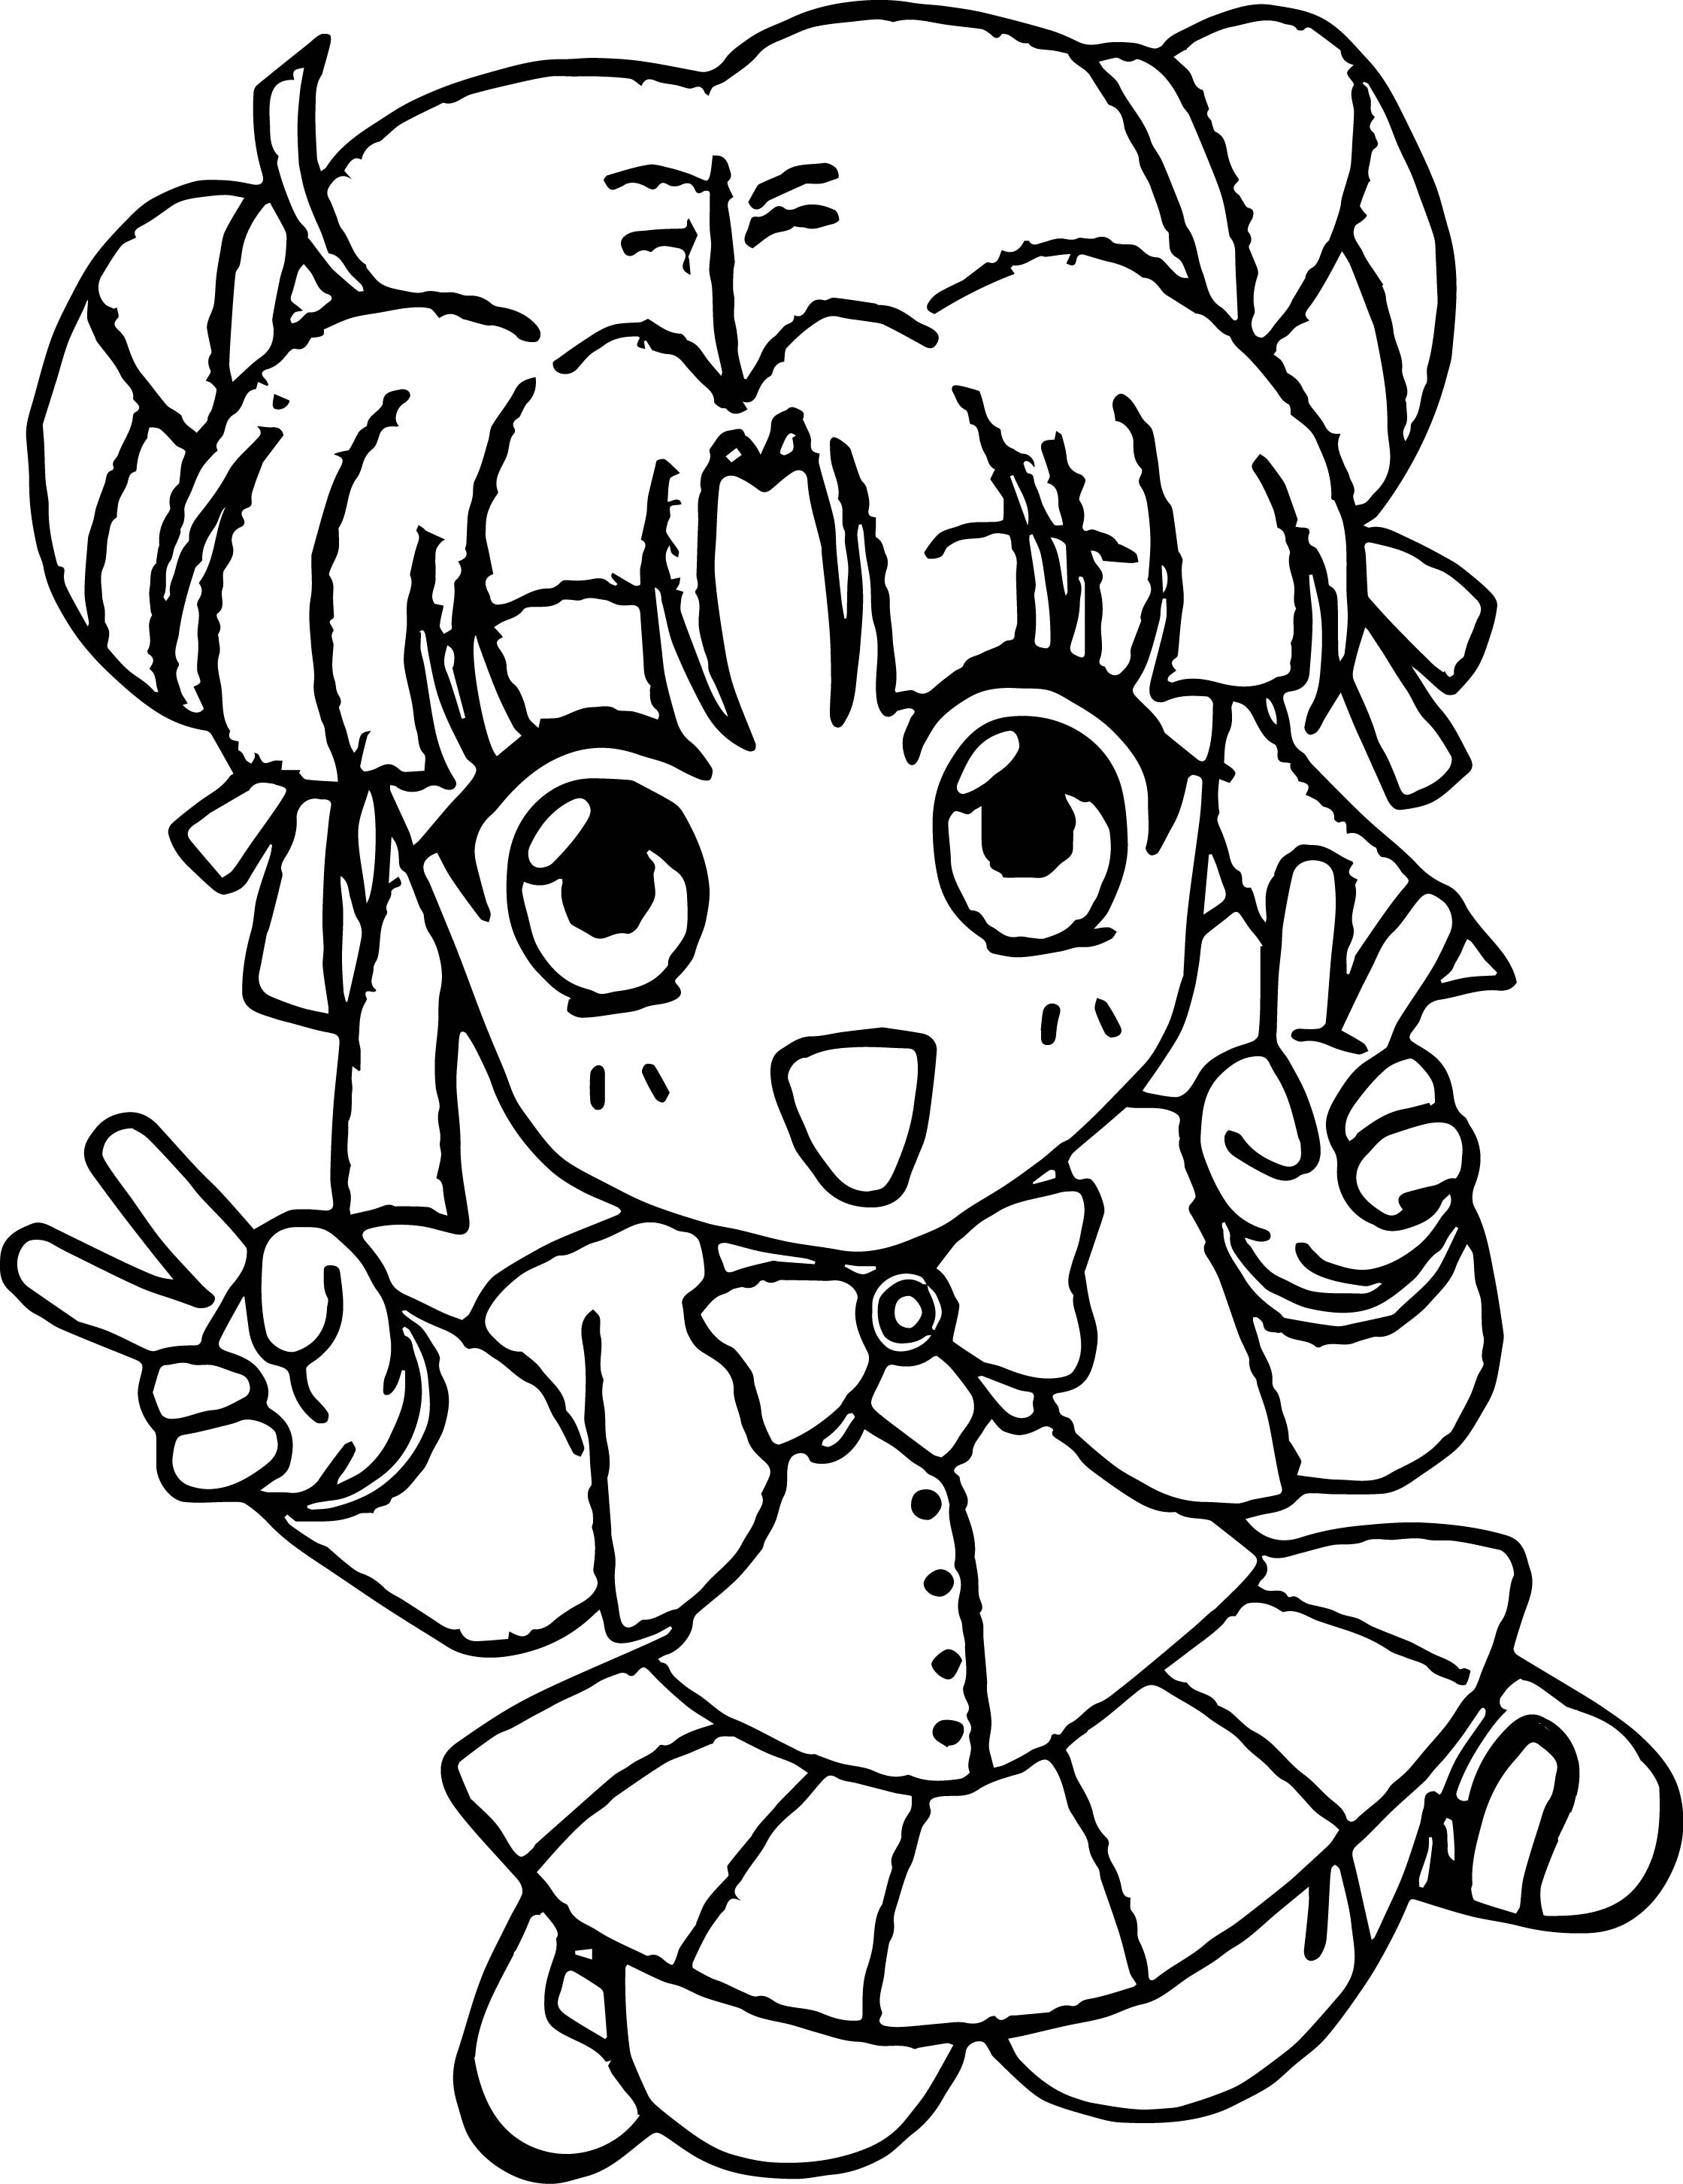 Chibi Anime Coloring Pages Printable : Coloring Pages Chibi Anime Cute ...